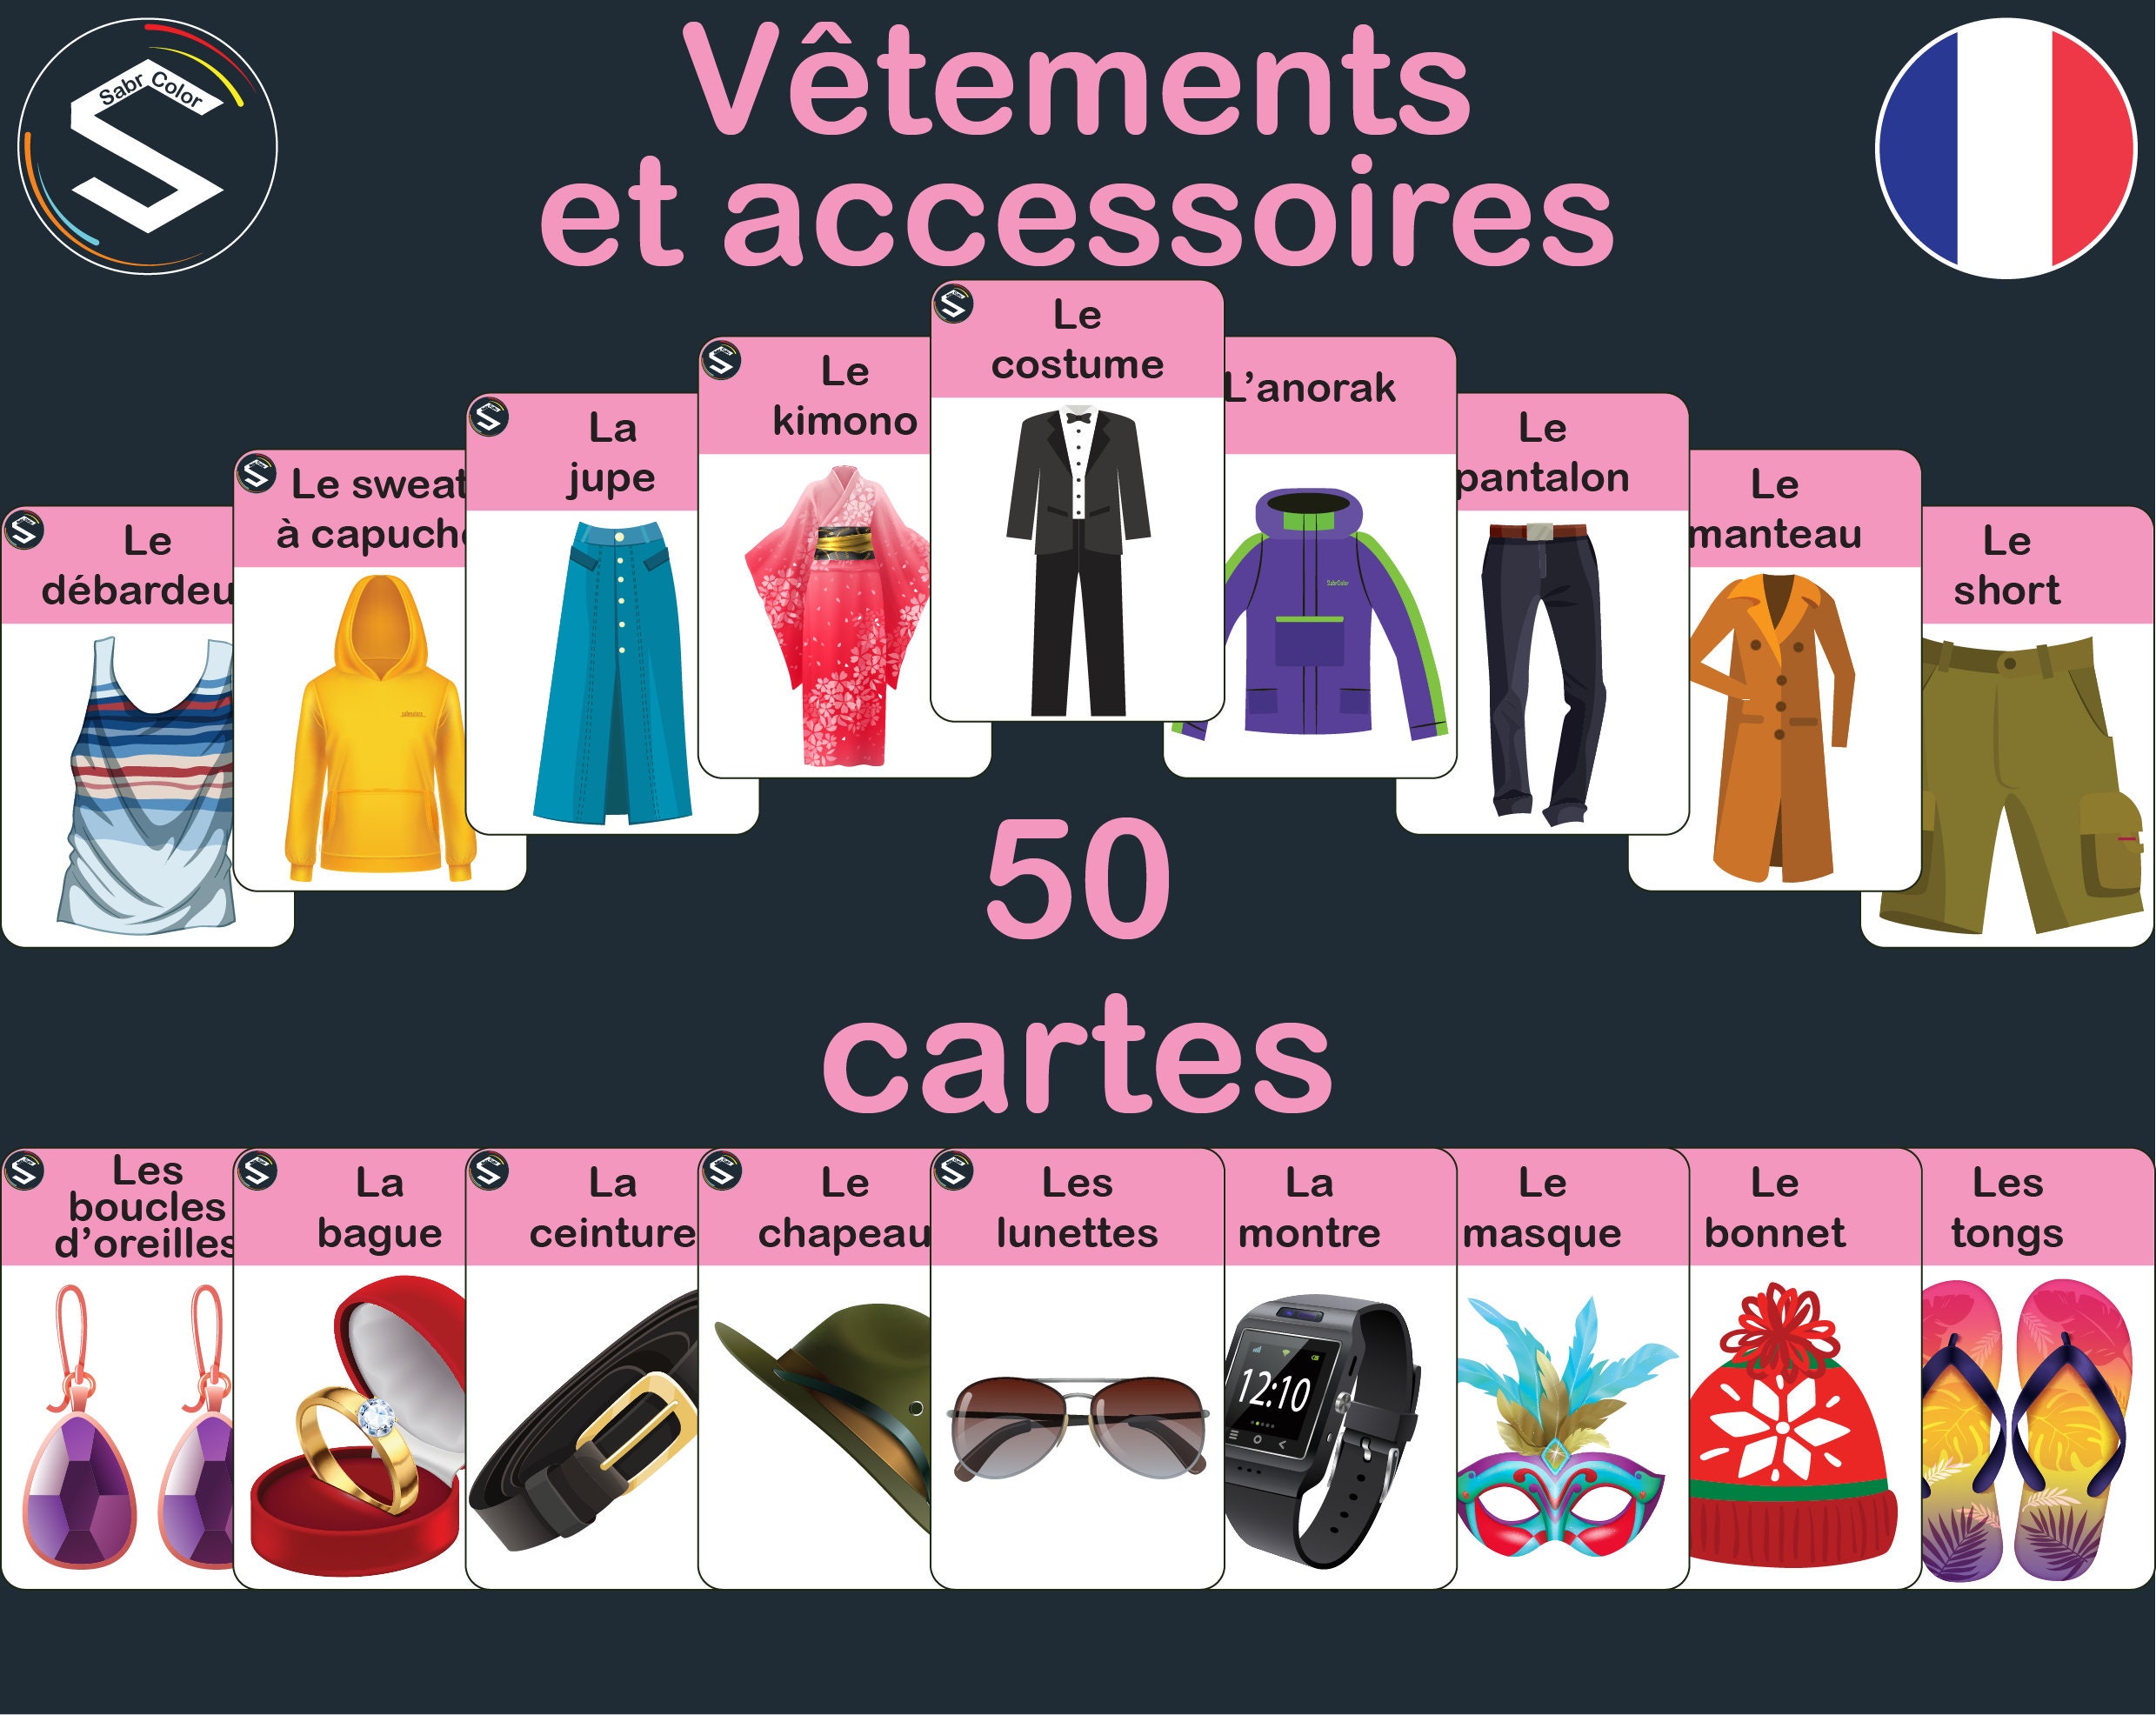 Clothes = Les Vetements (Bilingual First Books) (English and French Edition)